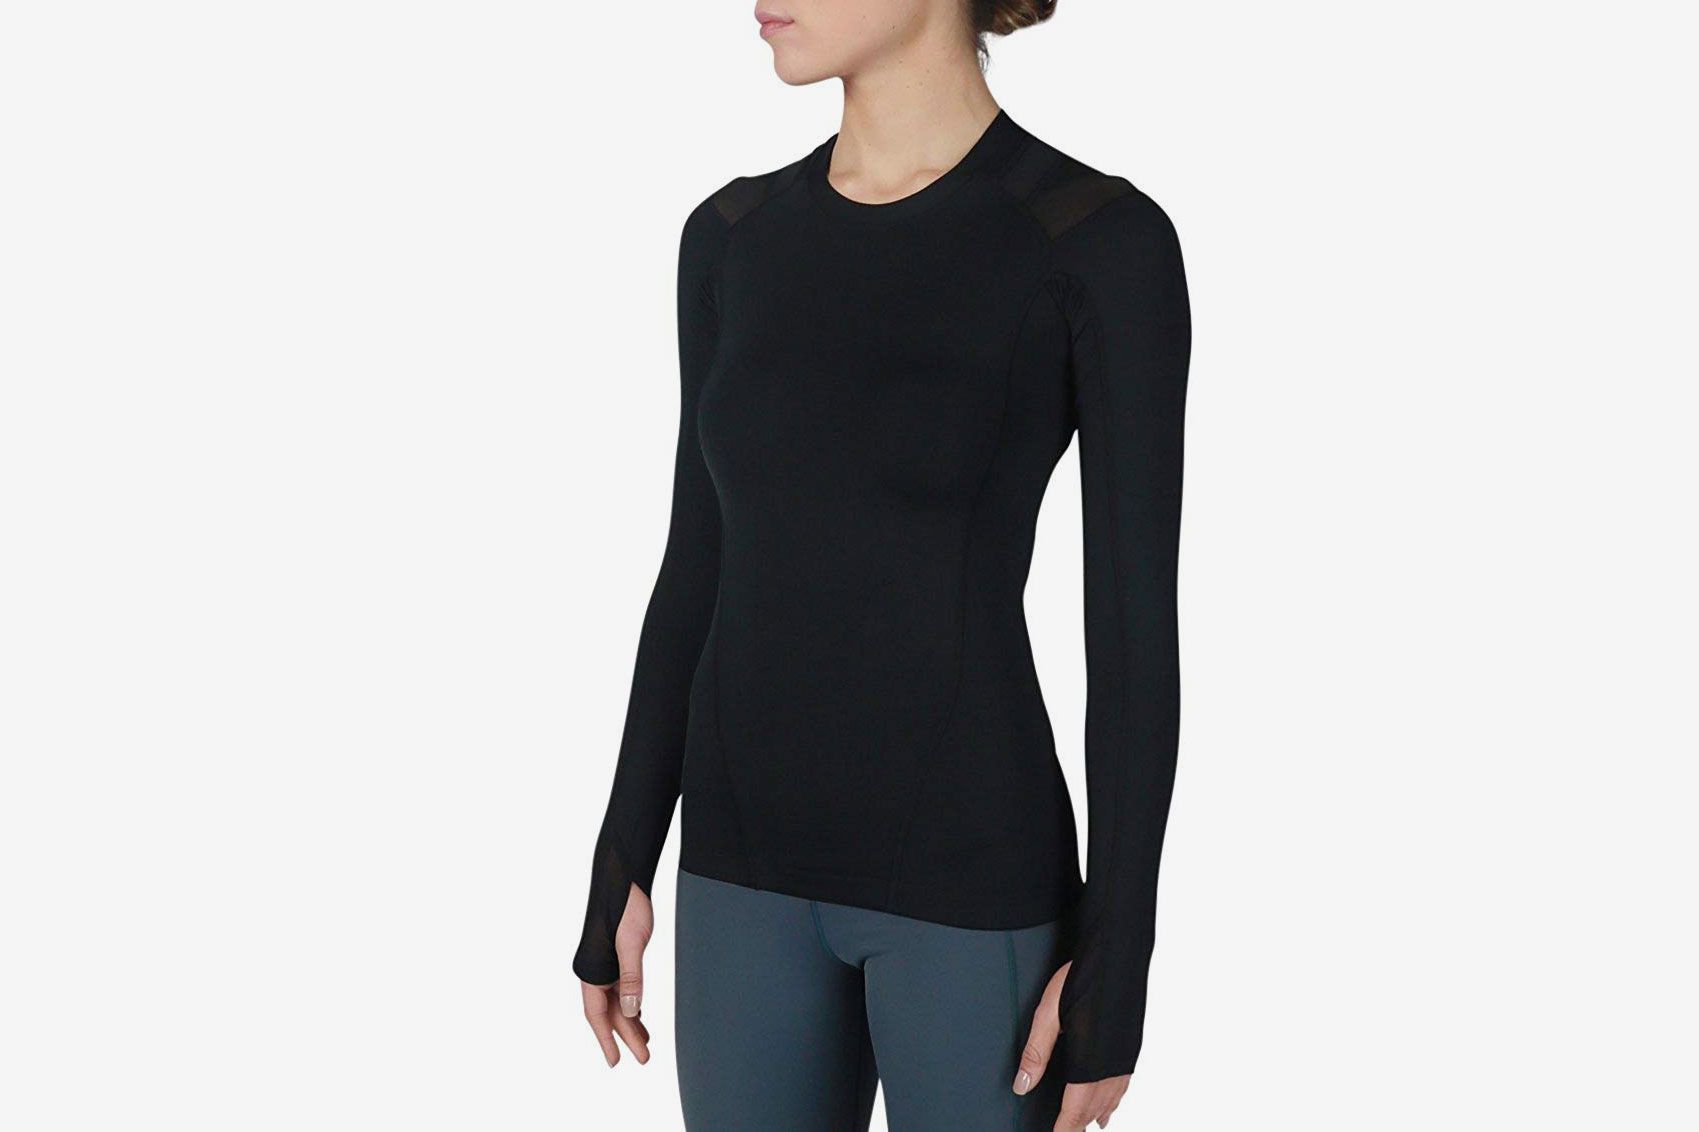 Review of Posture Shirt 2.0 by Active Posture Plus Discount Code –  Chronically Jenni